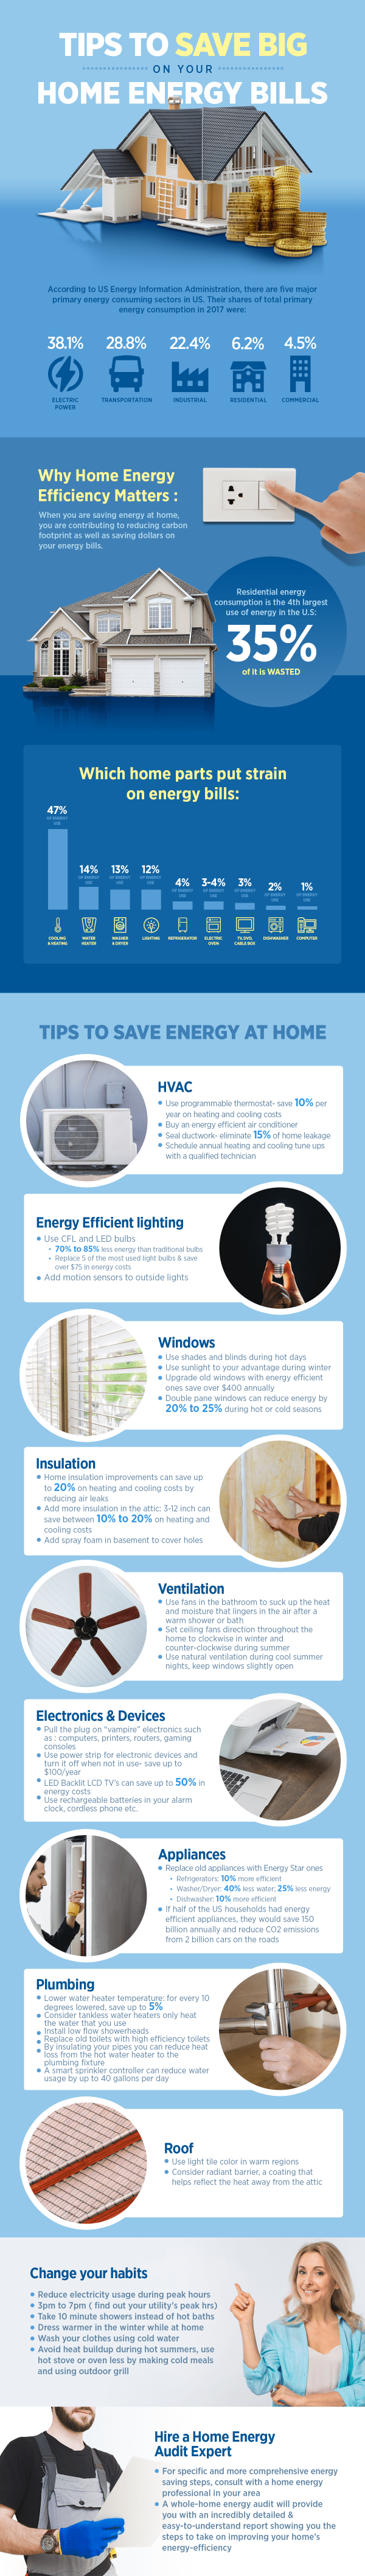 tips to save on energy at home